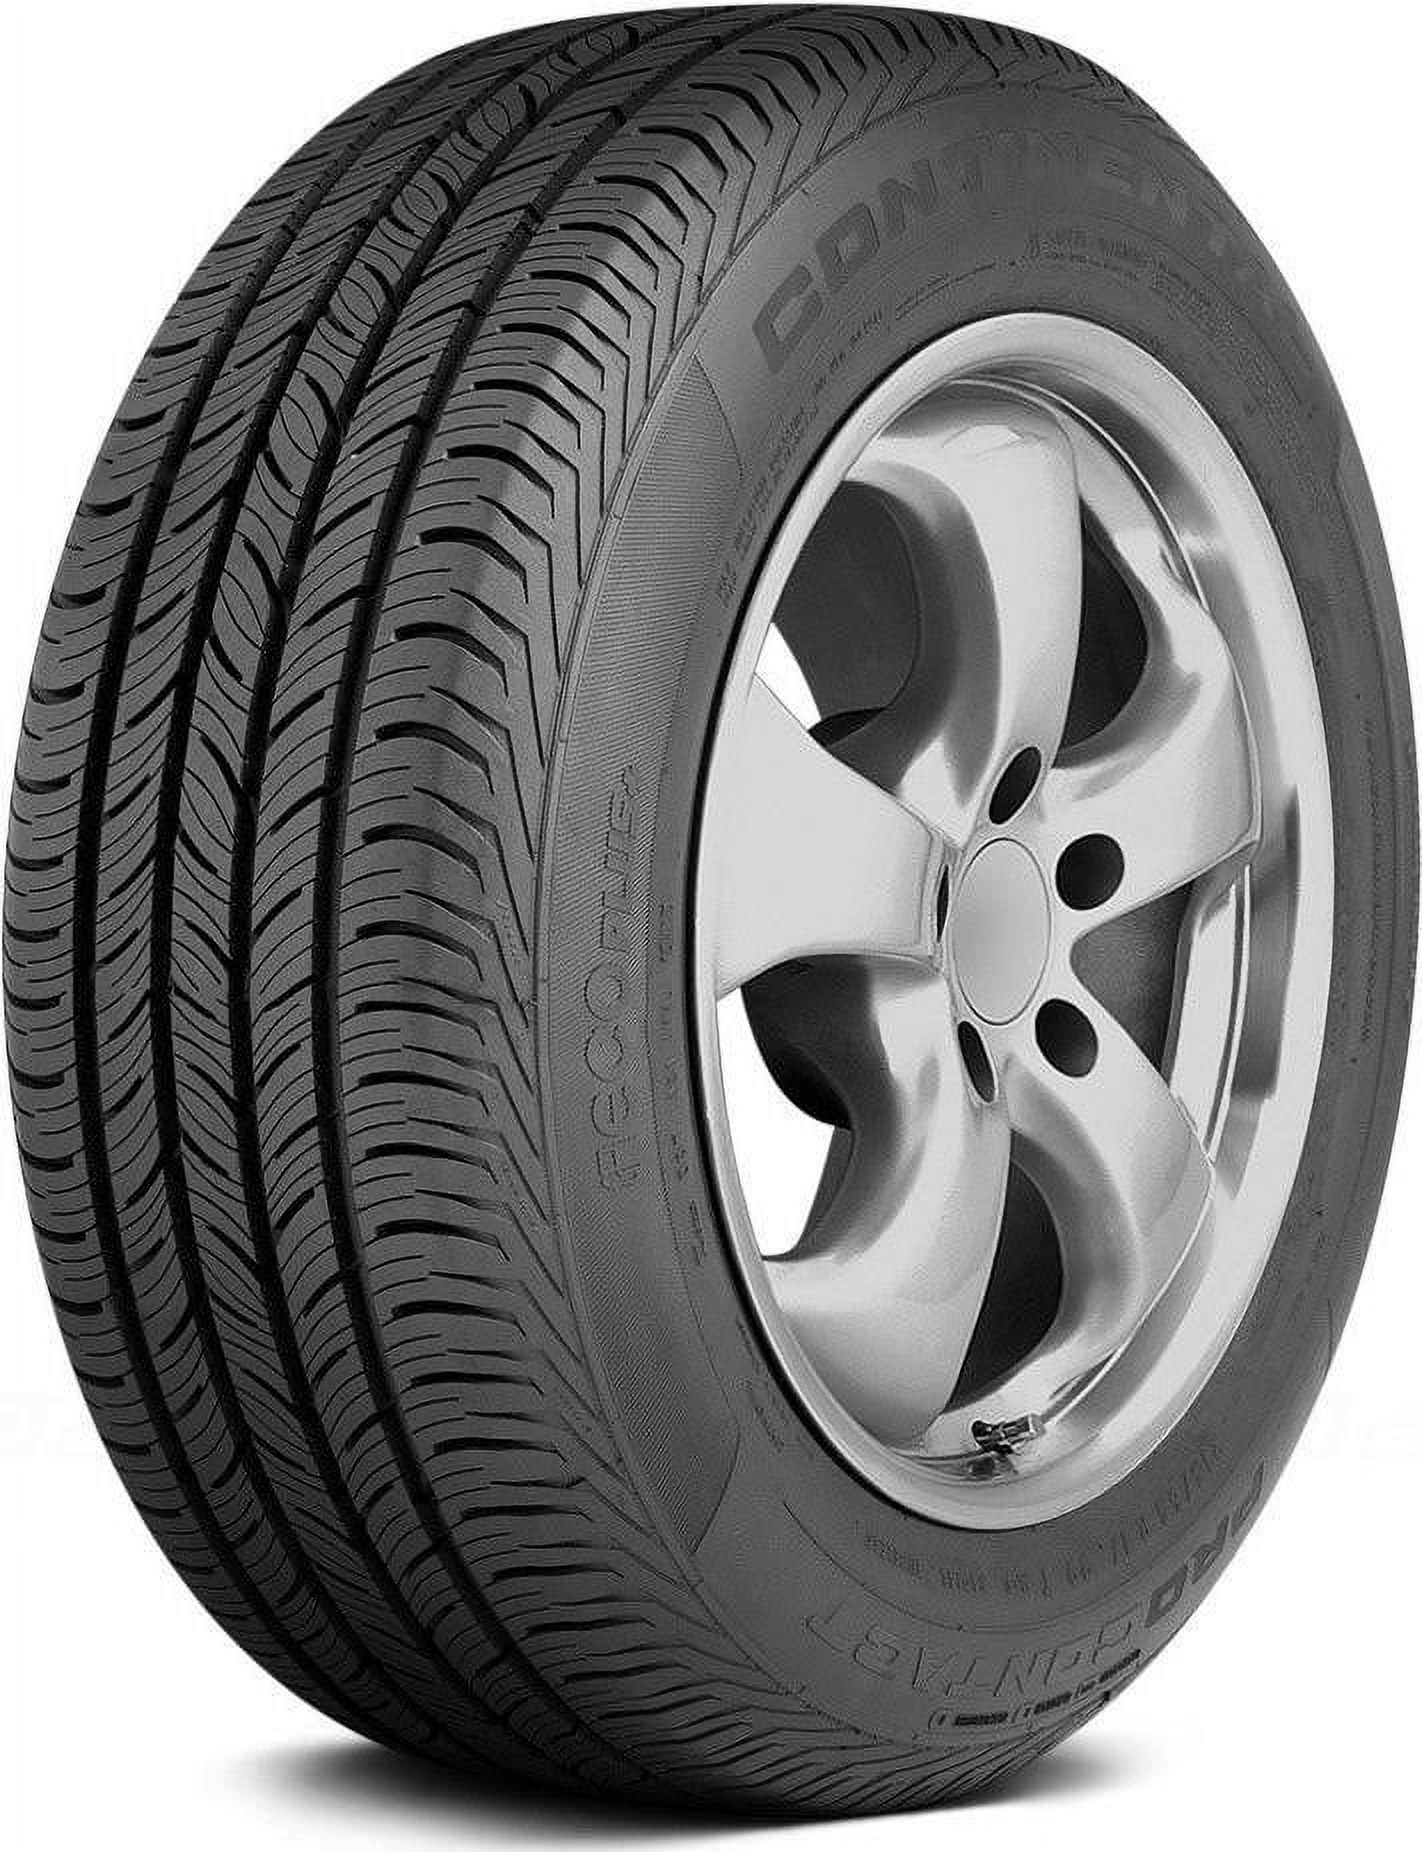 Continental ProContact EcoPlus 185/65R15 88T Fits: 2004-08 Toyota Prius Base, 2003-08 Toyota Corolla CE - image 5 of 6